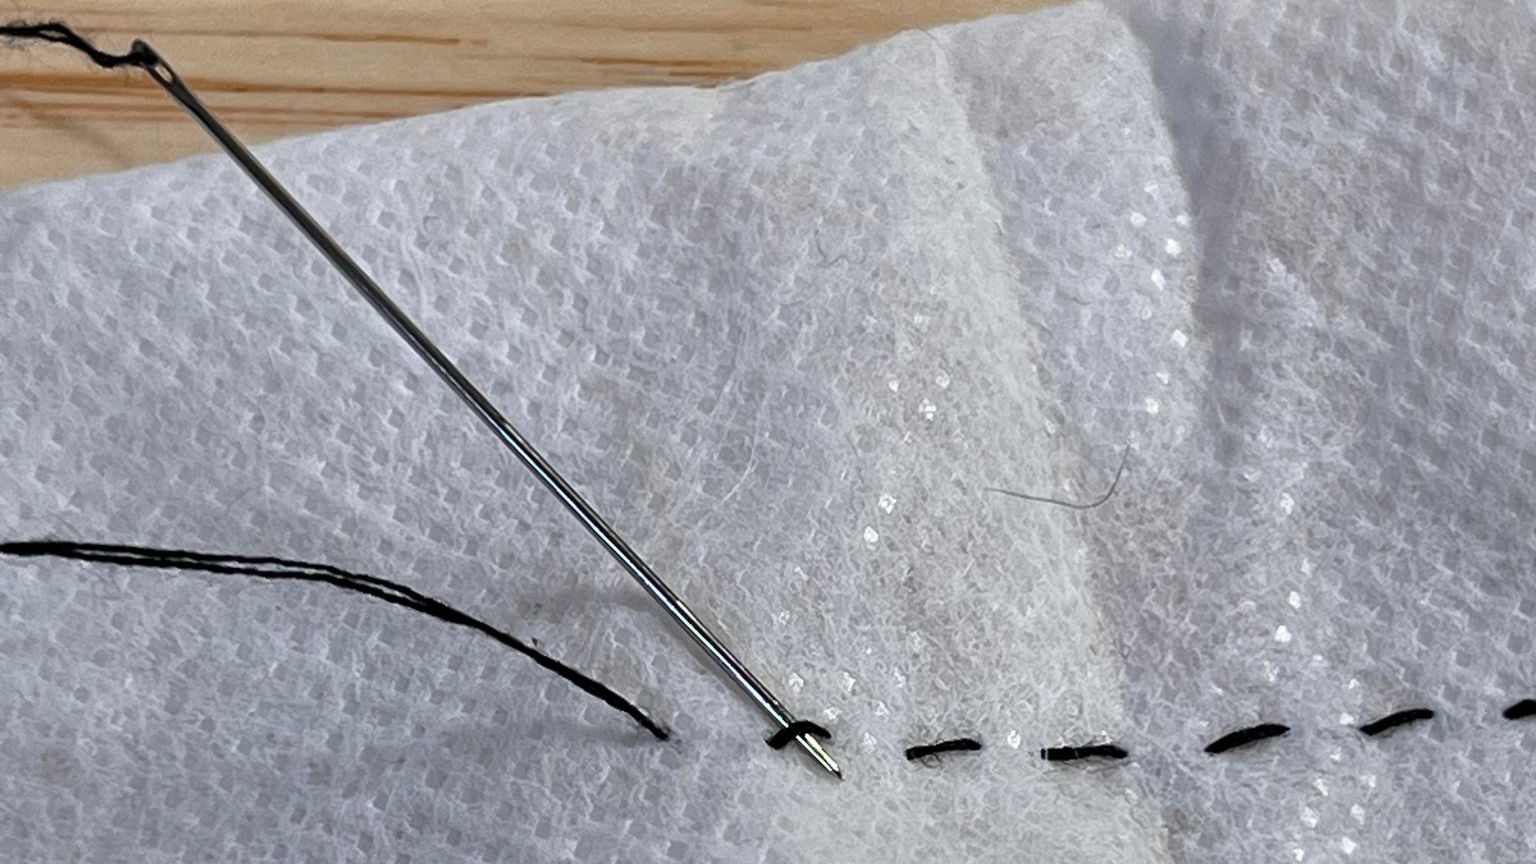 Thread the point of your needle between the bottom of your last stitch and the fabric.